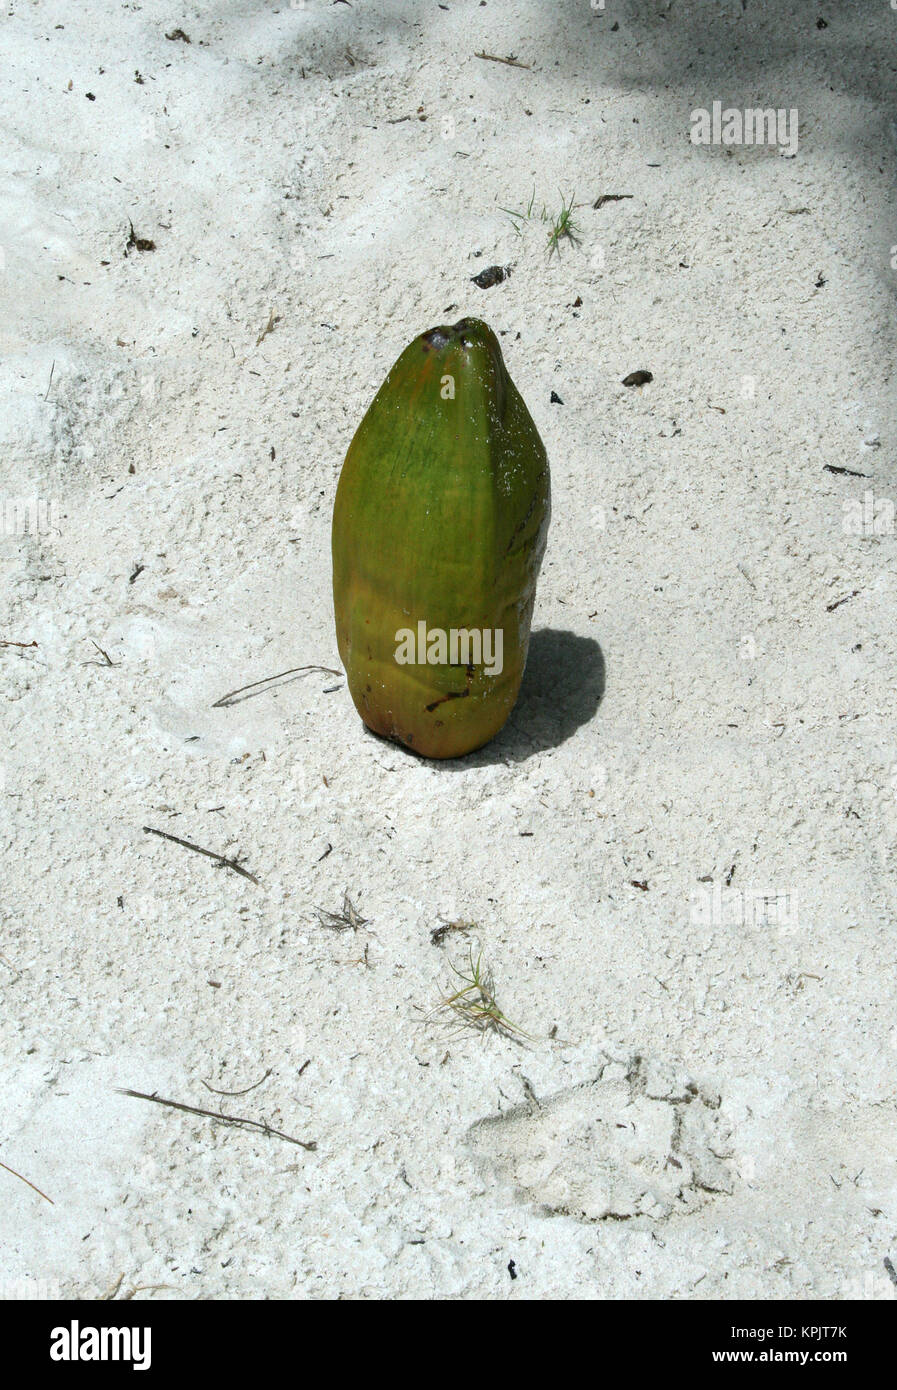 Coco de mer palm tree coco fruit standing on beach, Curieuse Island, Seychelles. Stock Photo